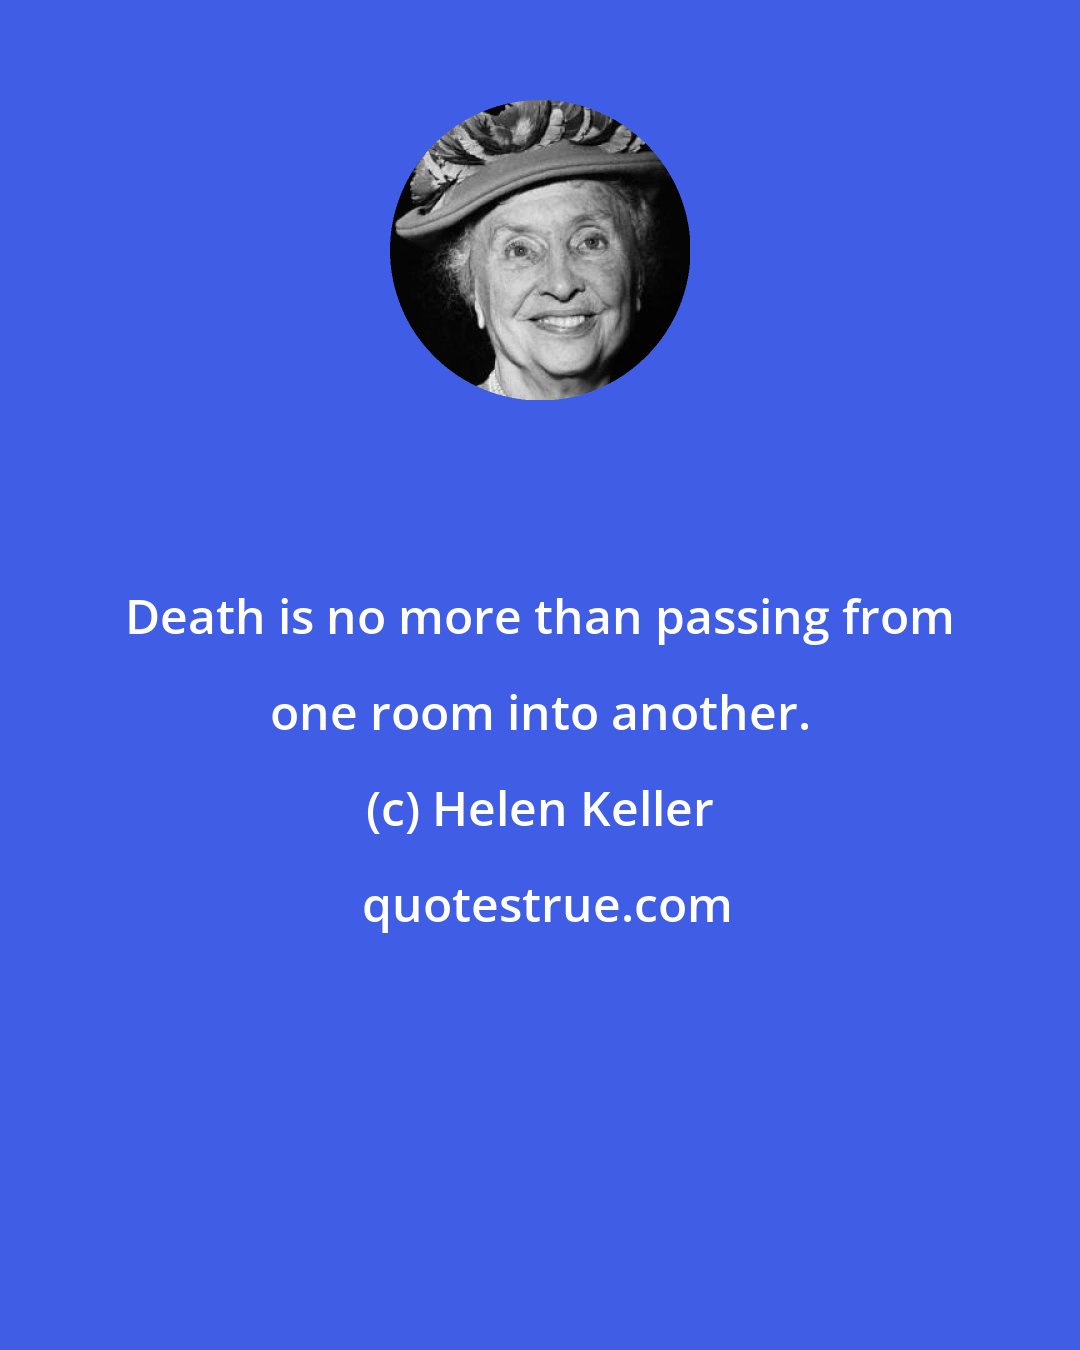 Helen Keller: Death is no more than passing from one room into another.